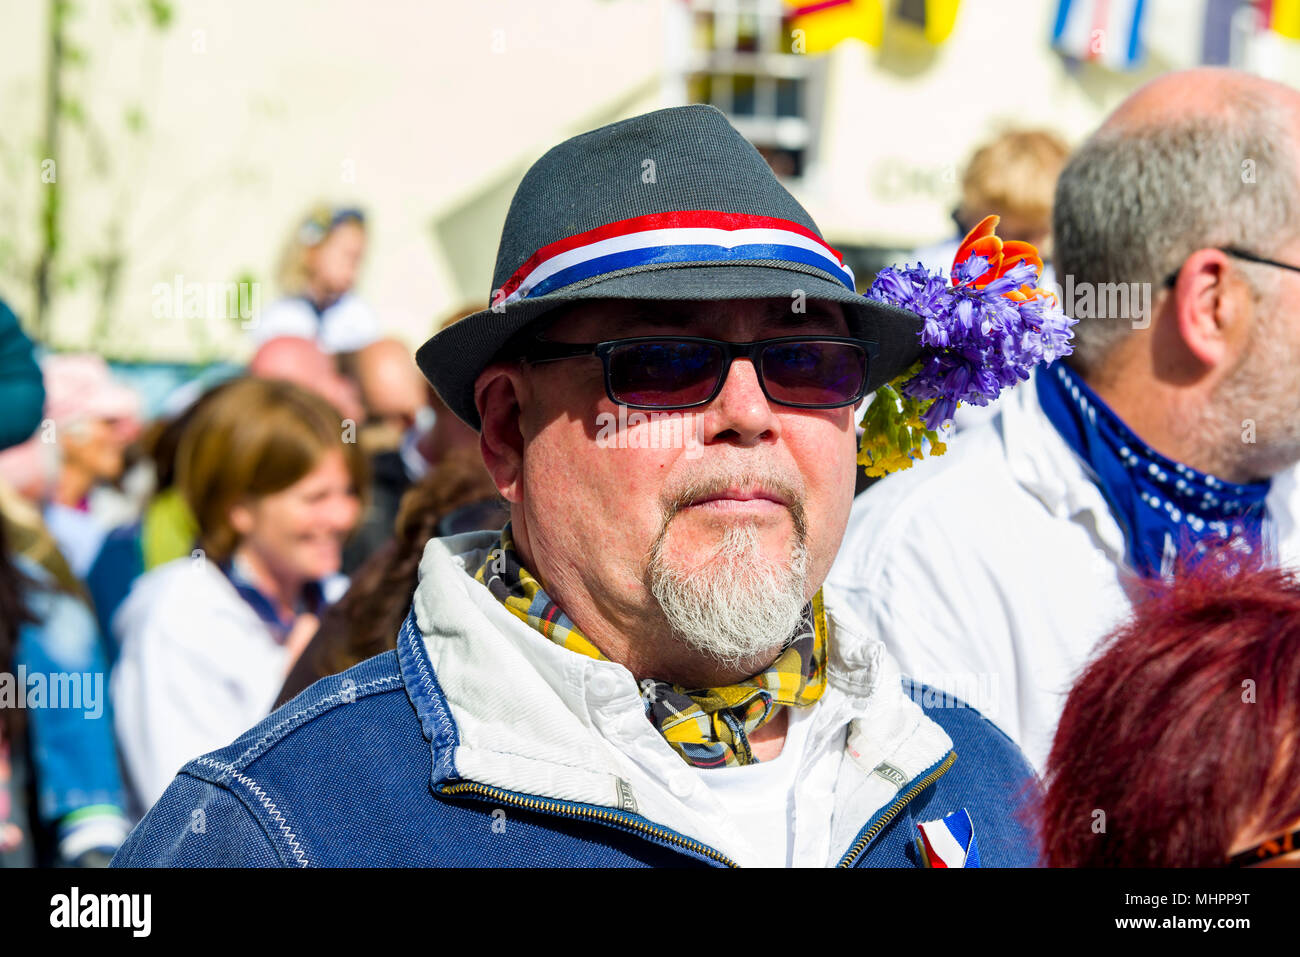 Editorial: Unknown members of the public, potential logos and signage. Padstow, Cornwall, UK 01/05/2018. Padstow residents parade through the streets  Stock Photo